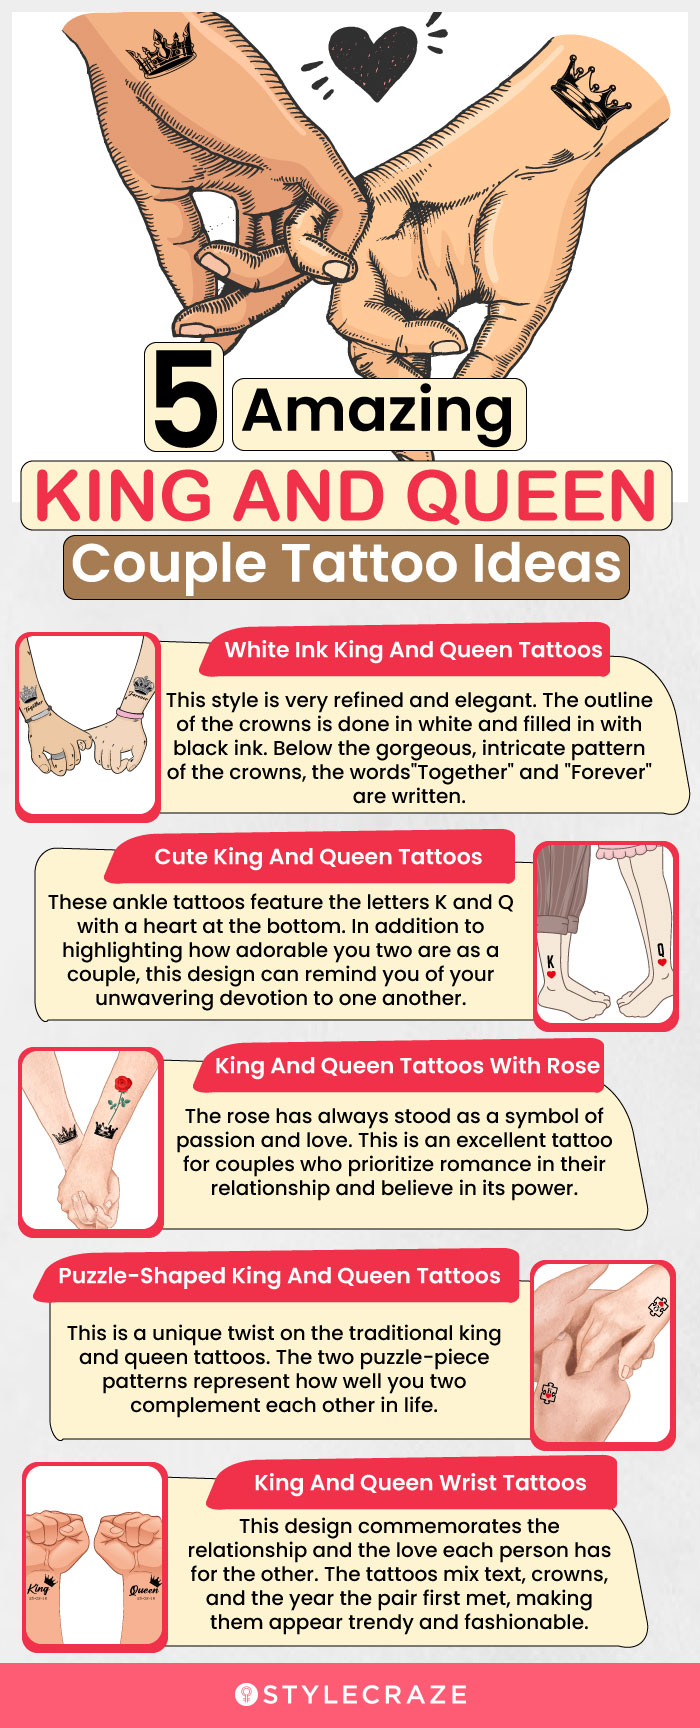 5 amazing king and queen couple tattoo ideas (infographic)